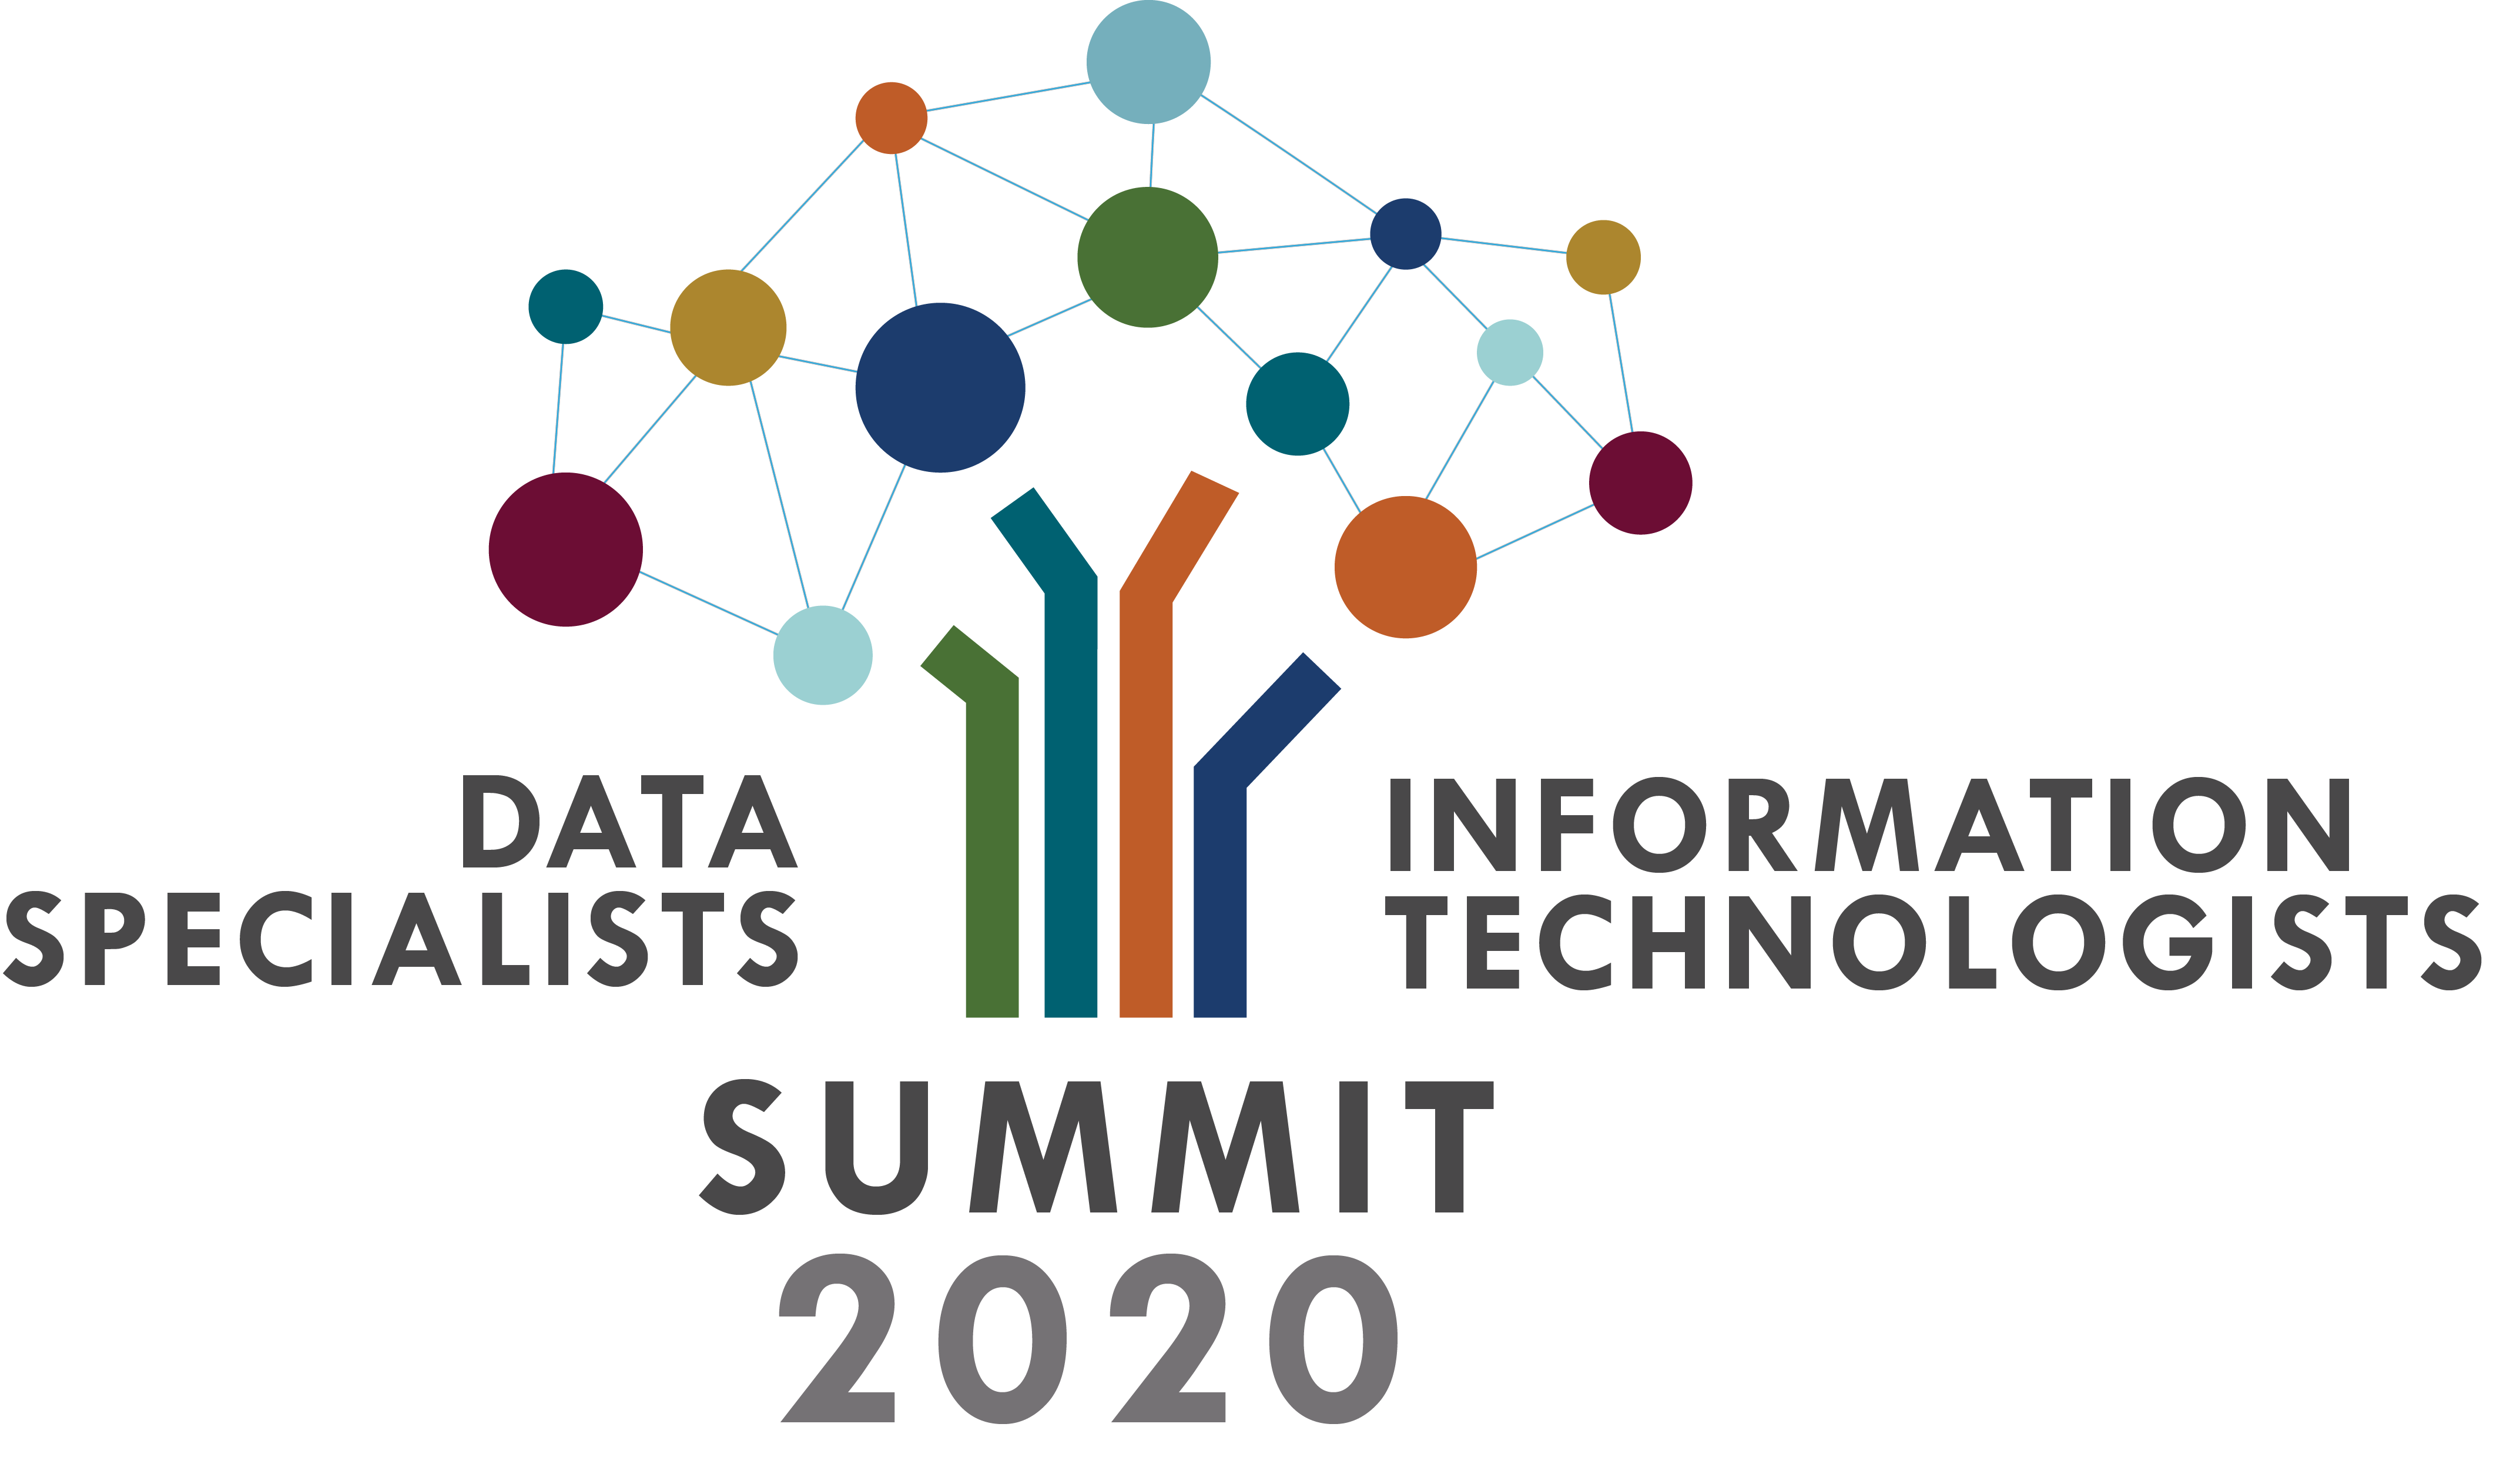 Data Specialists/Information Technologists Summit | NCSC